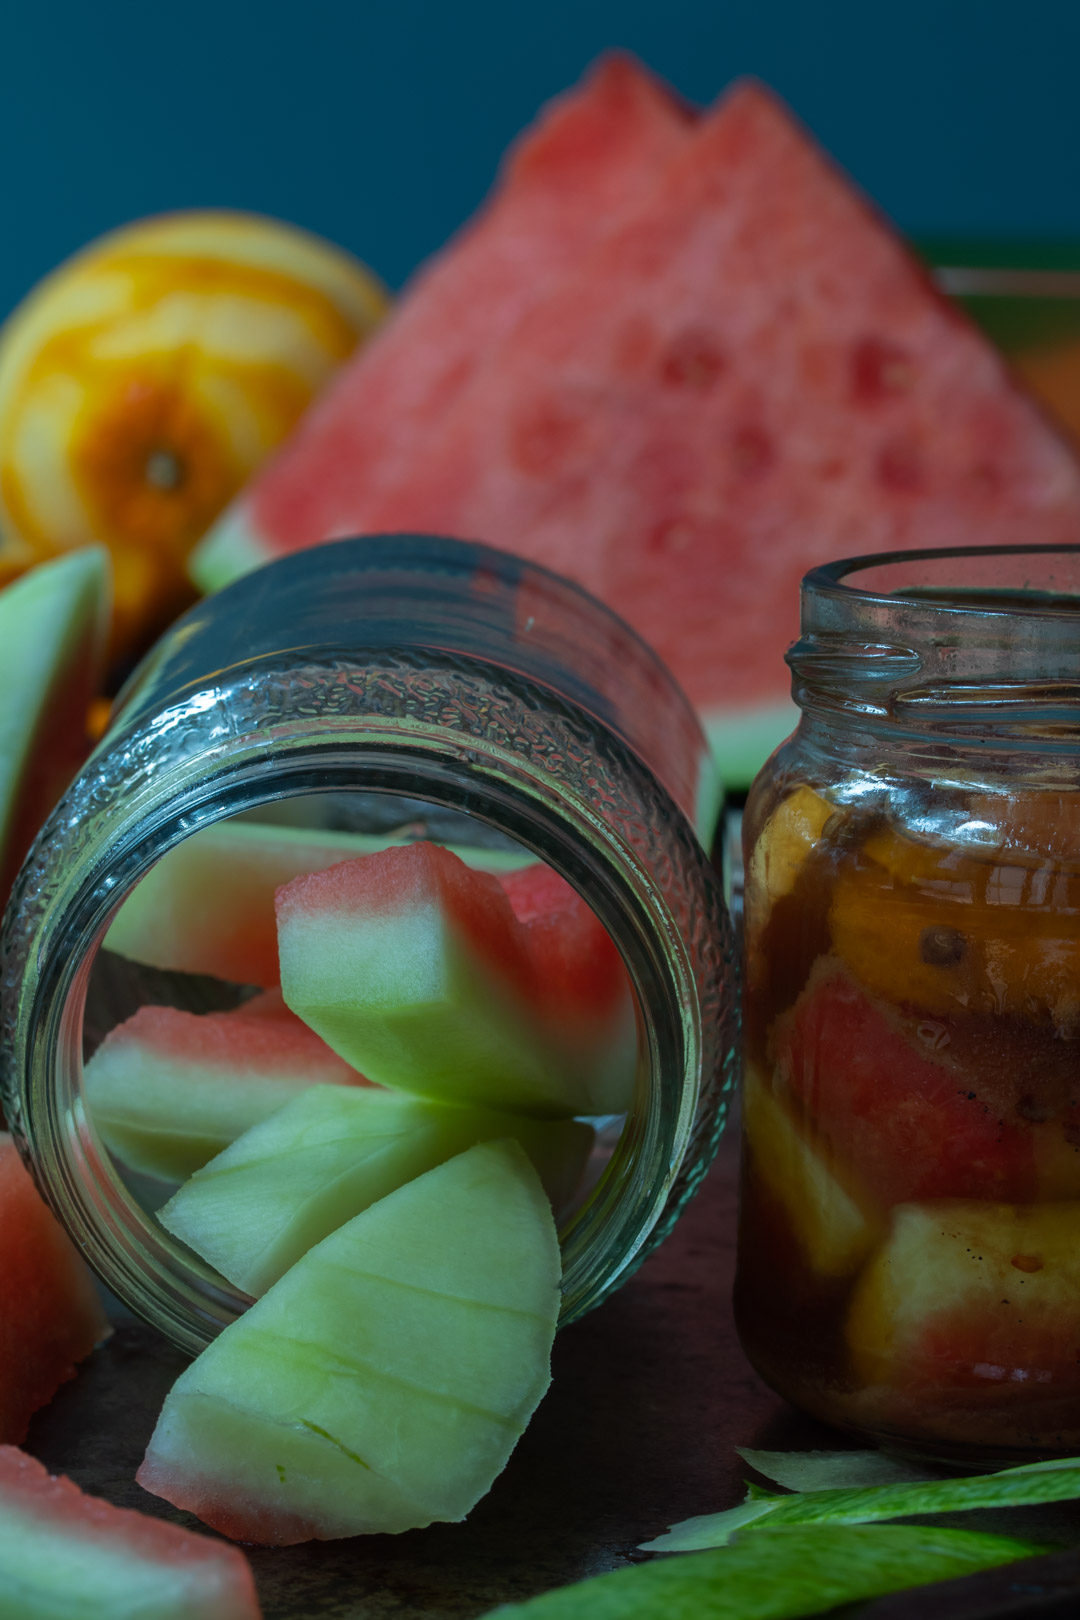 Quick watermelon rind pickle with cinnamon and chili: making pickles